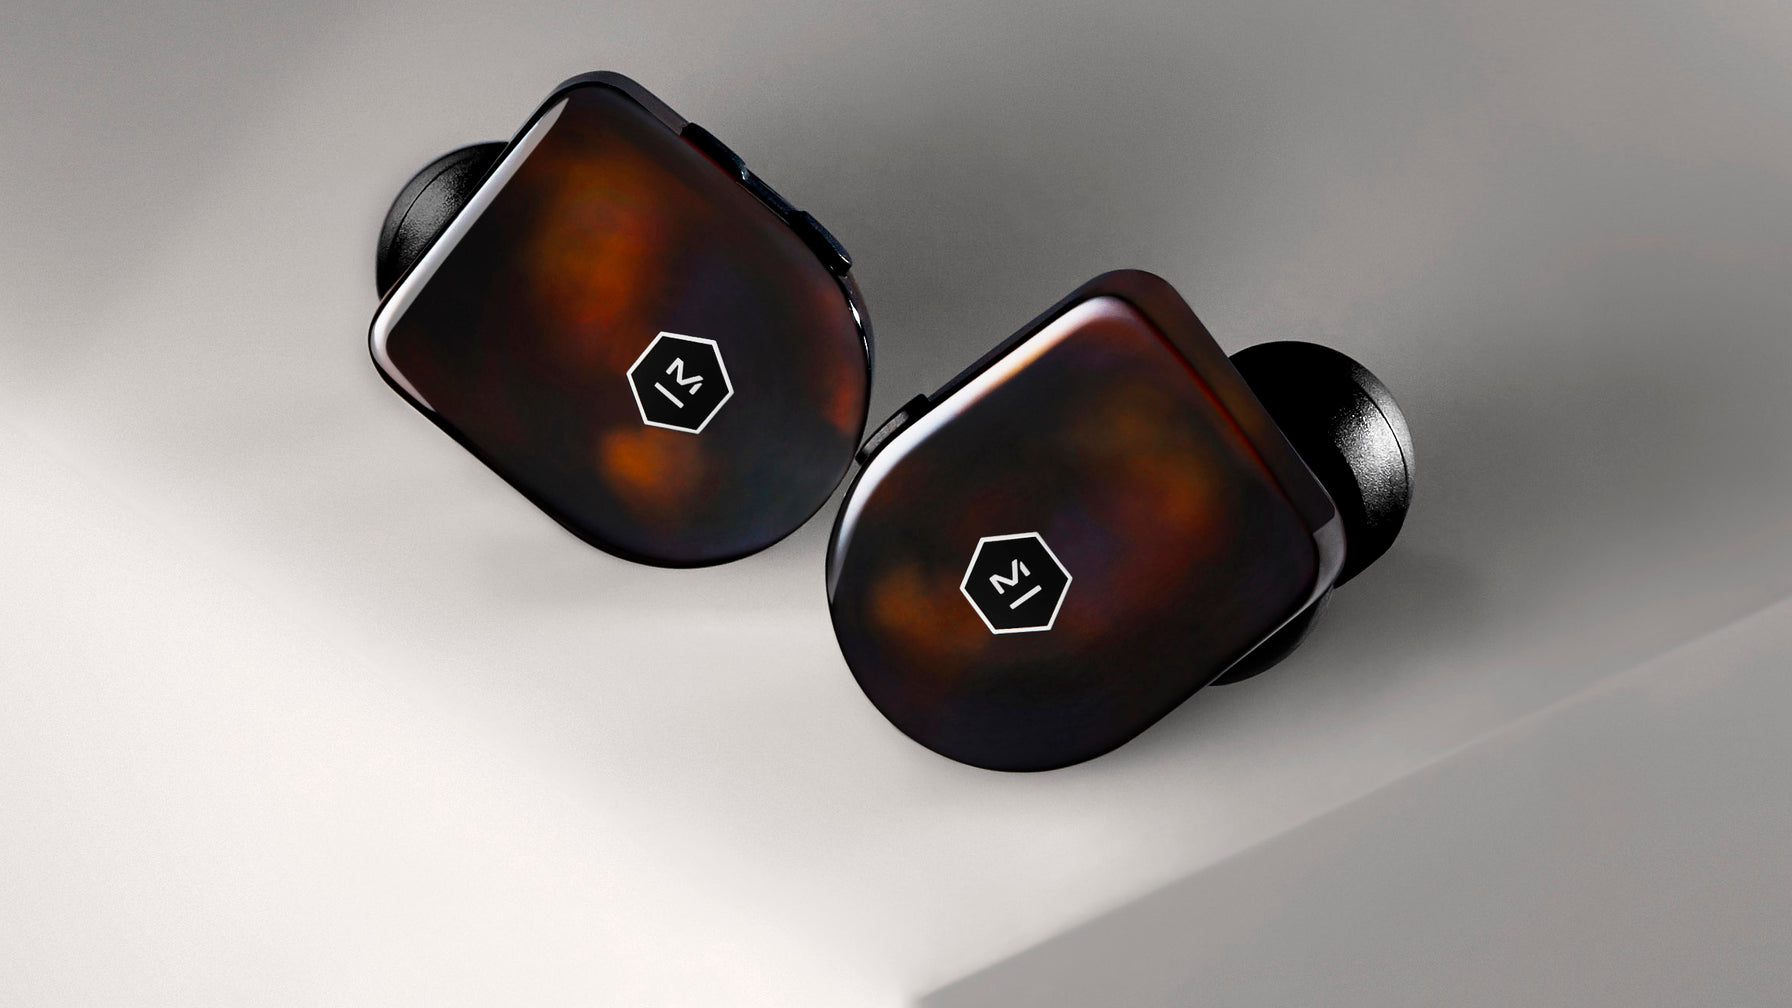 The MW07 True Wireless Earphones Win The Red Dot Award For Product Design